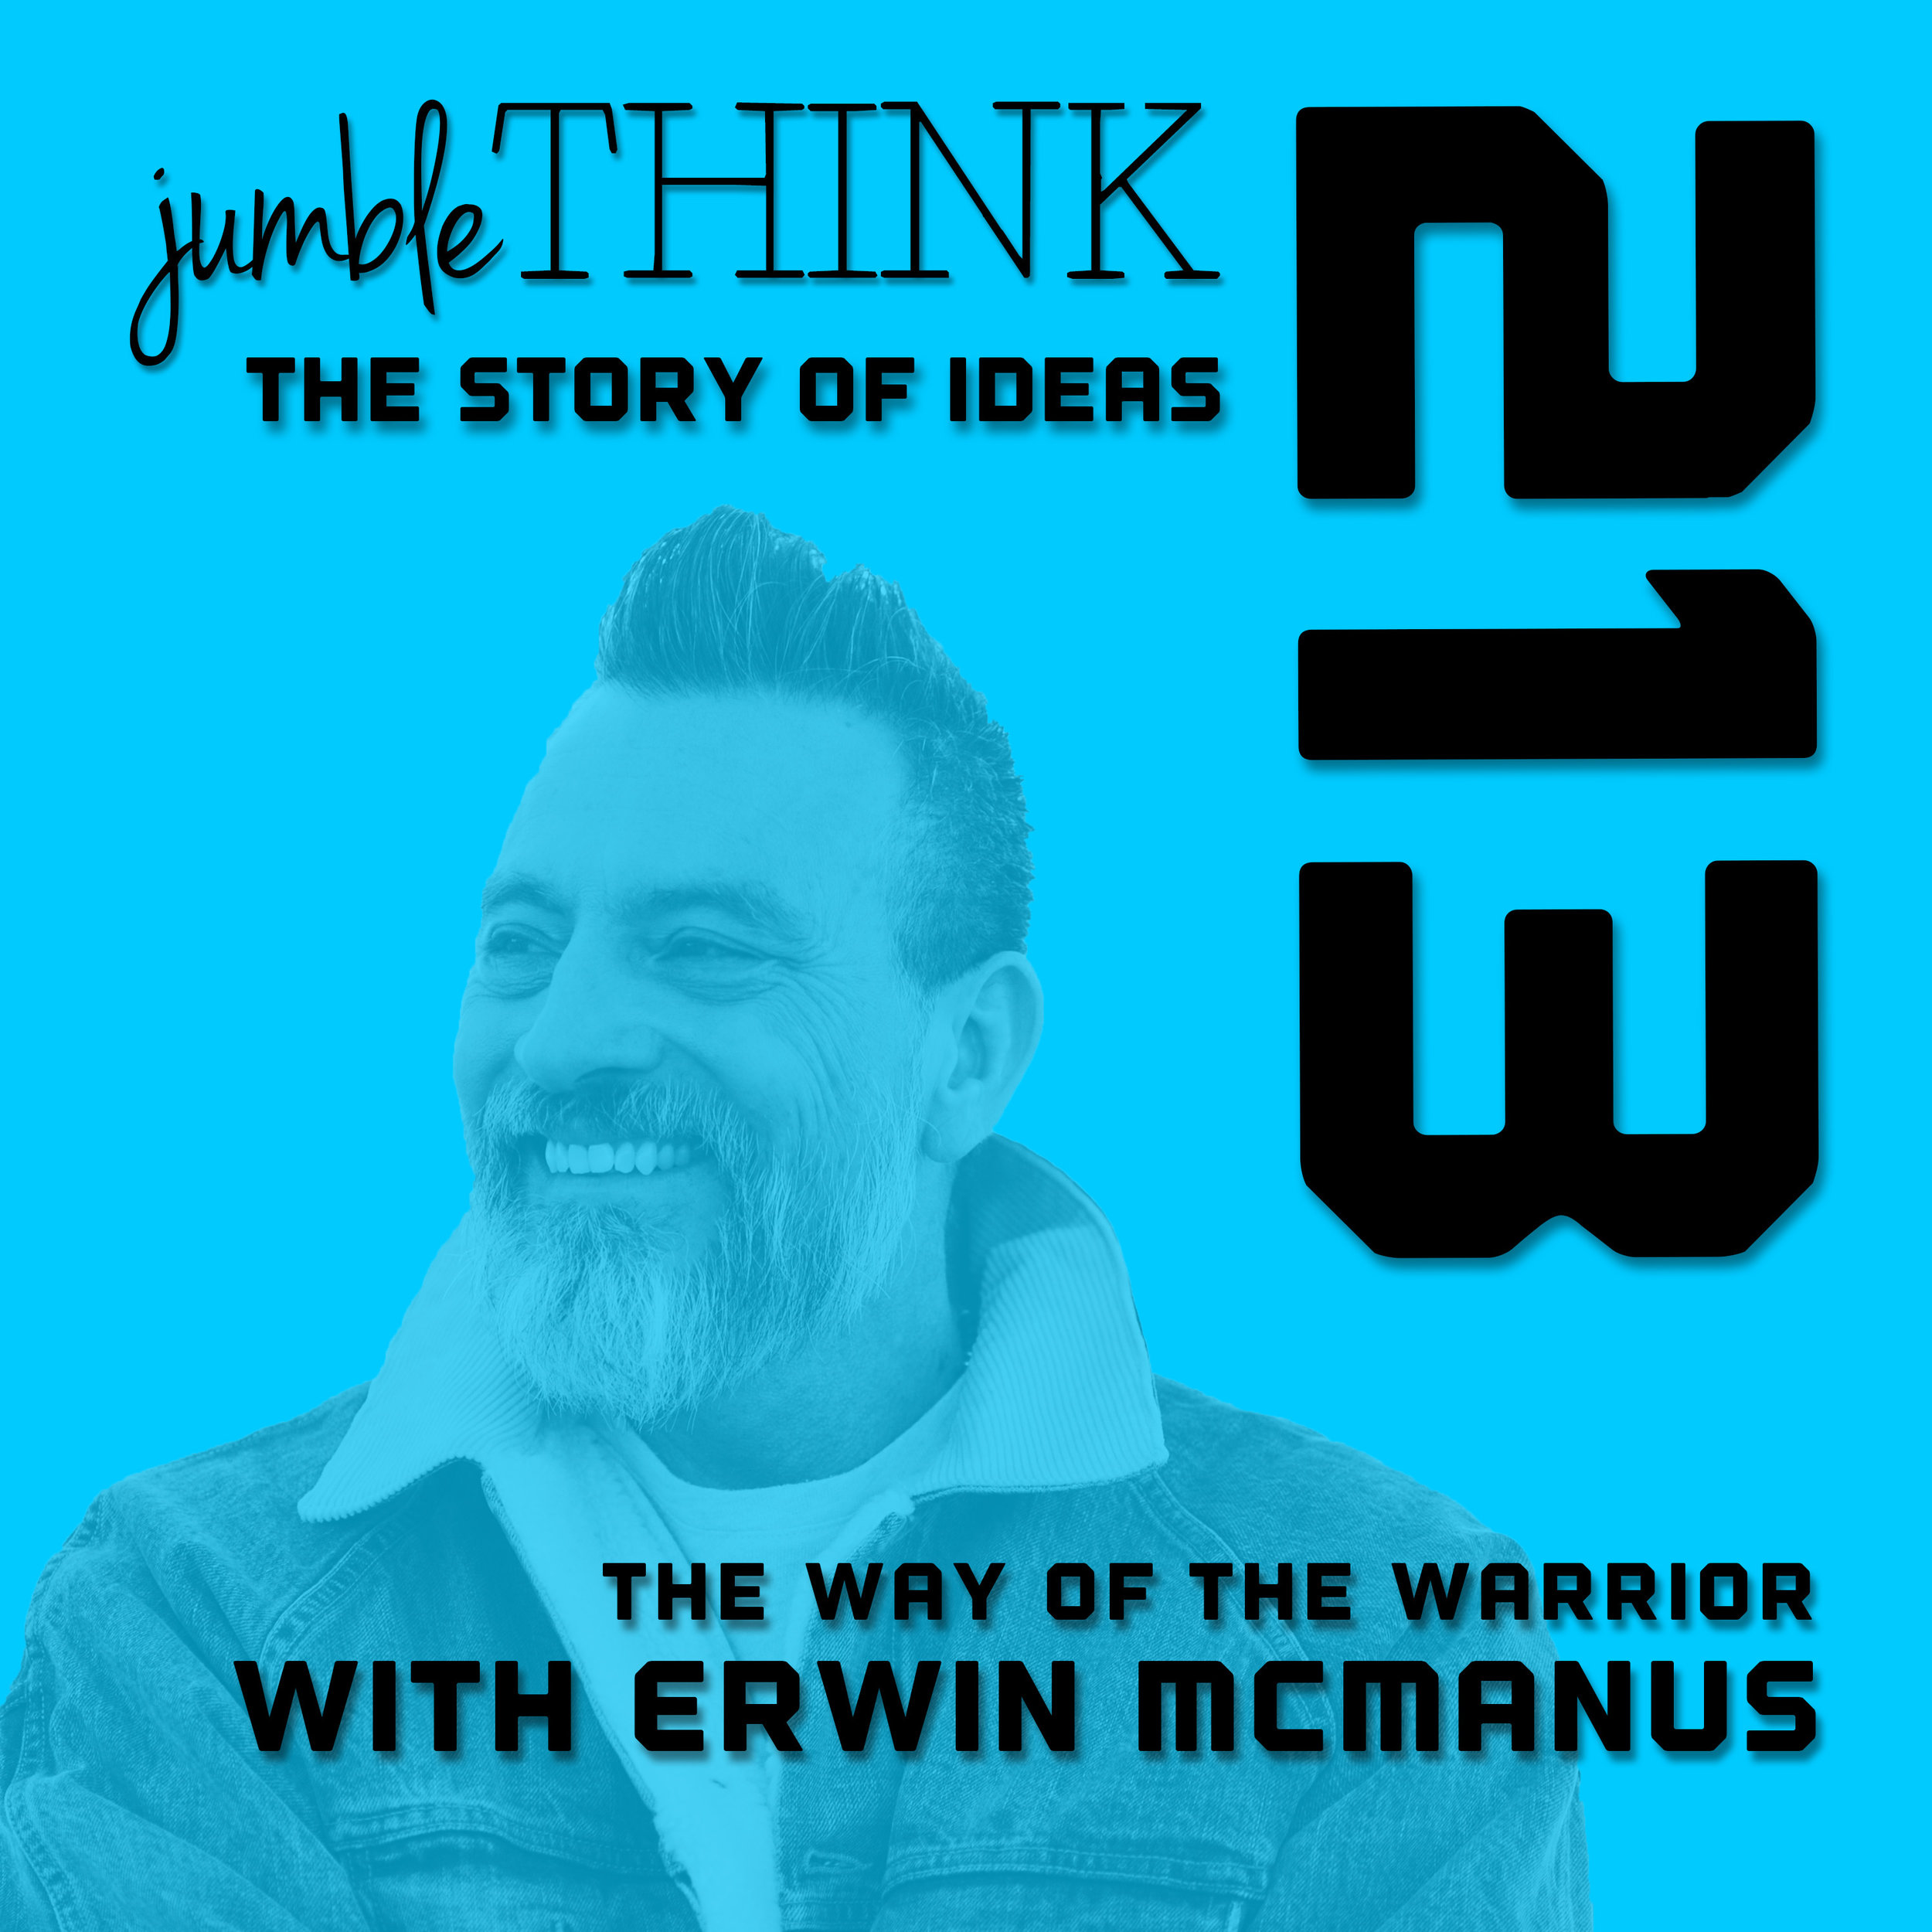 Erwin McManus on 'The Way of the Warrior'